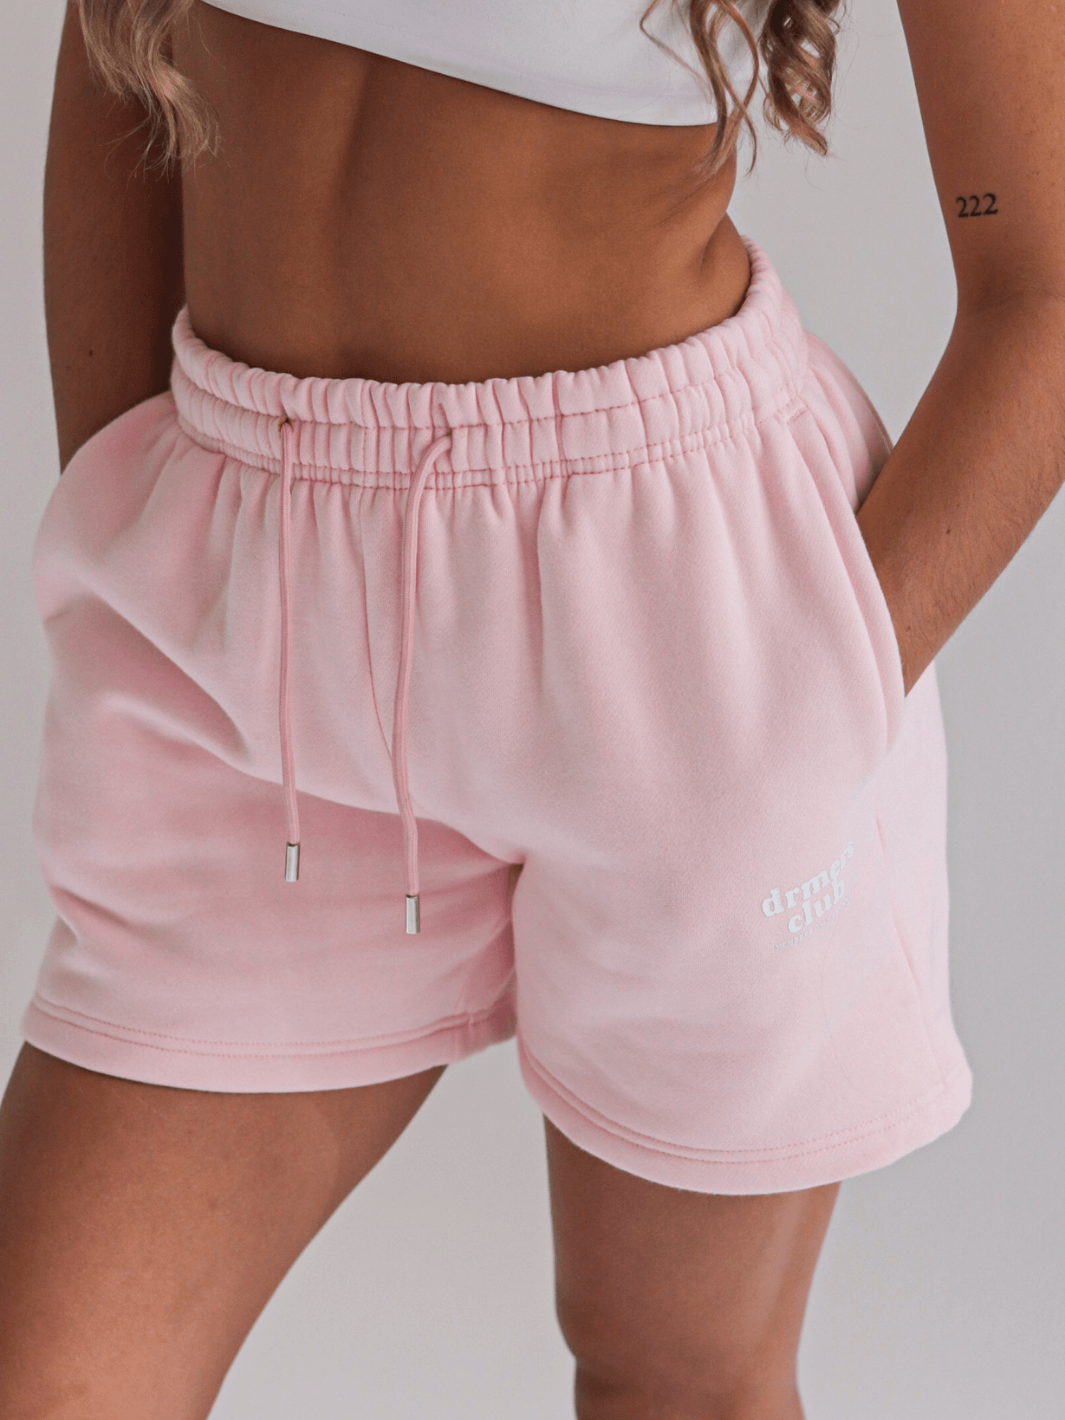 members only sweat shorts - baby pink